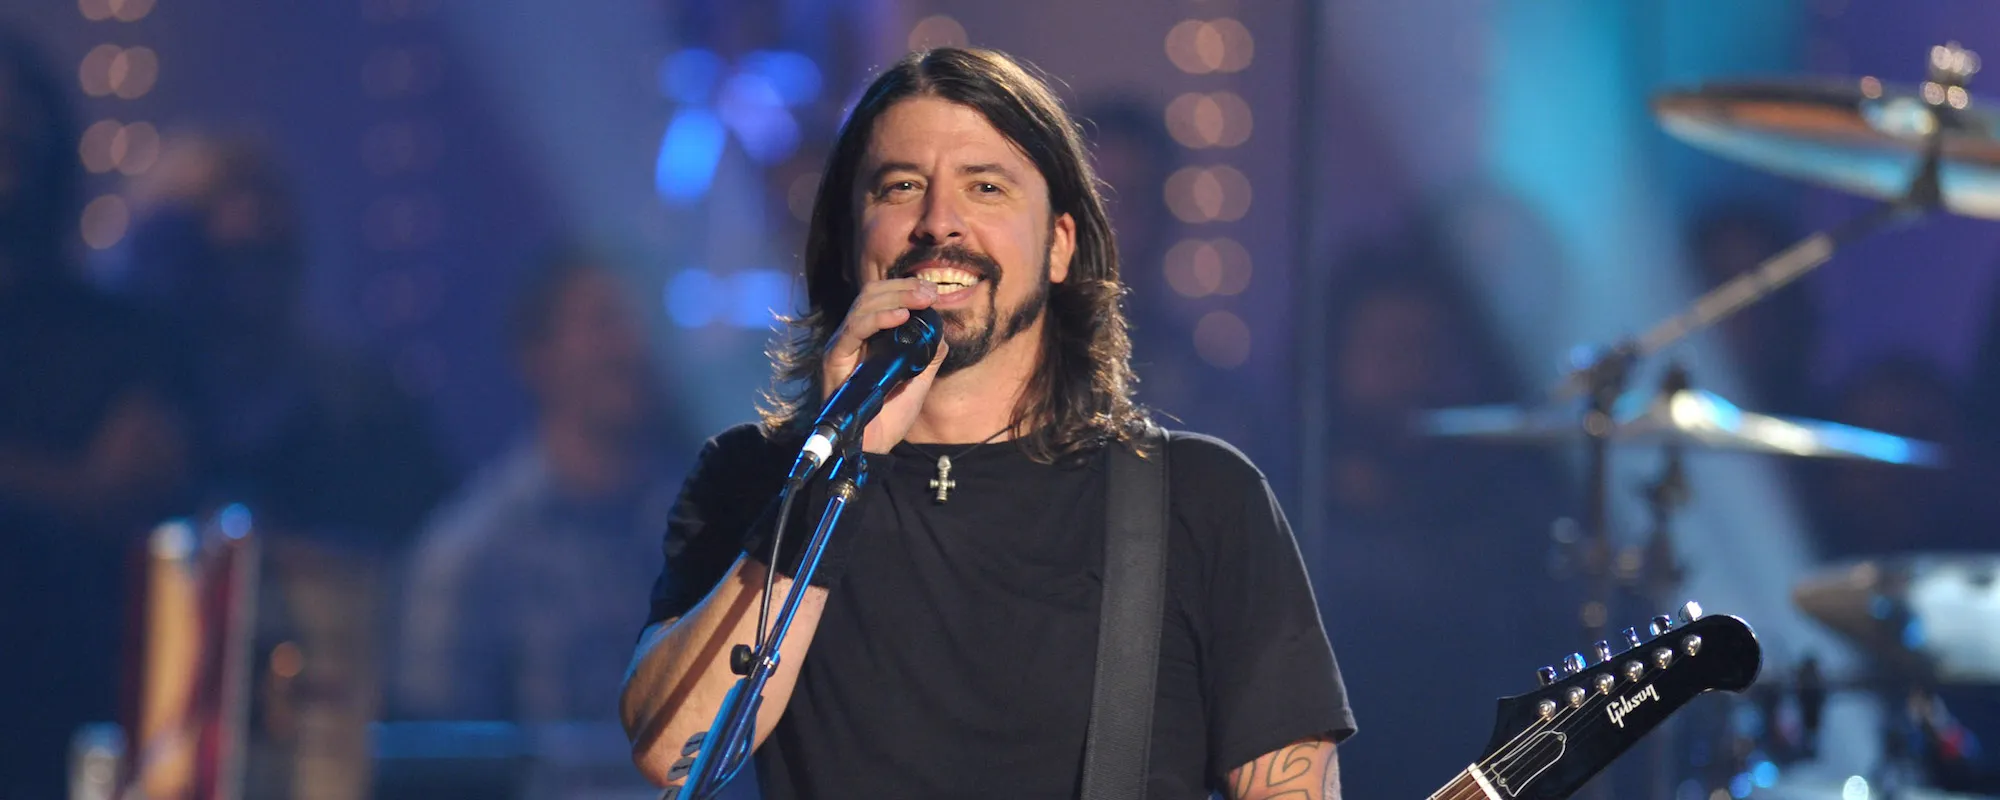 The Story Behind the Only Song Dave Grohl Recorded with Nirvana and Foo Fighters, “Marigold”